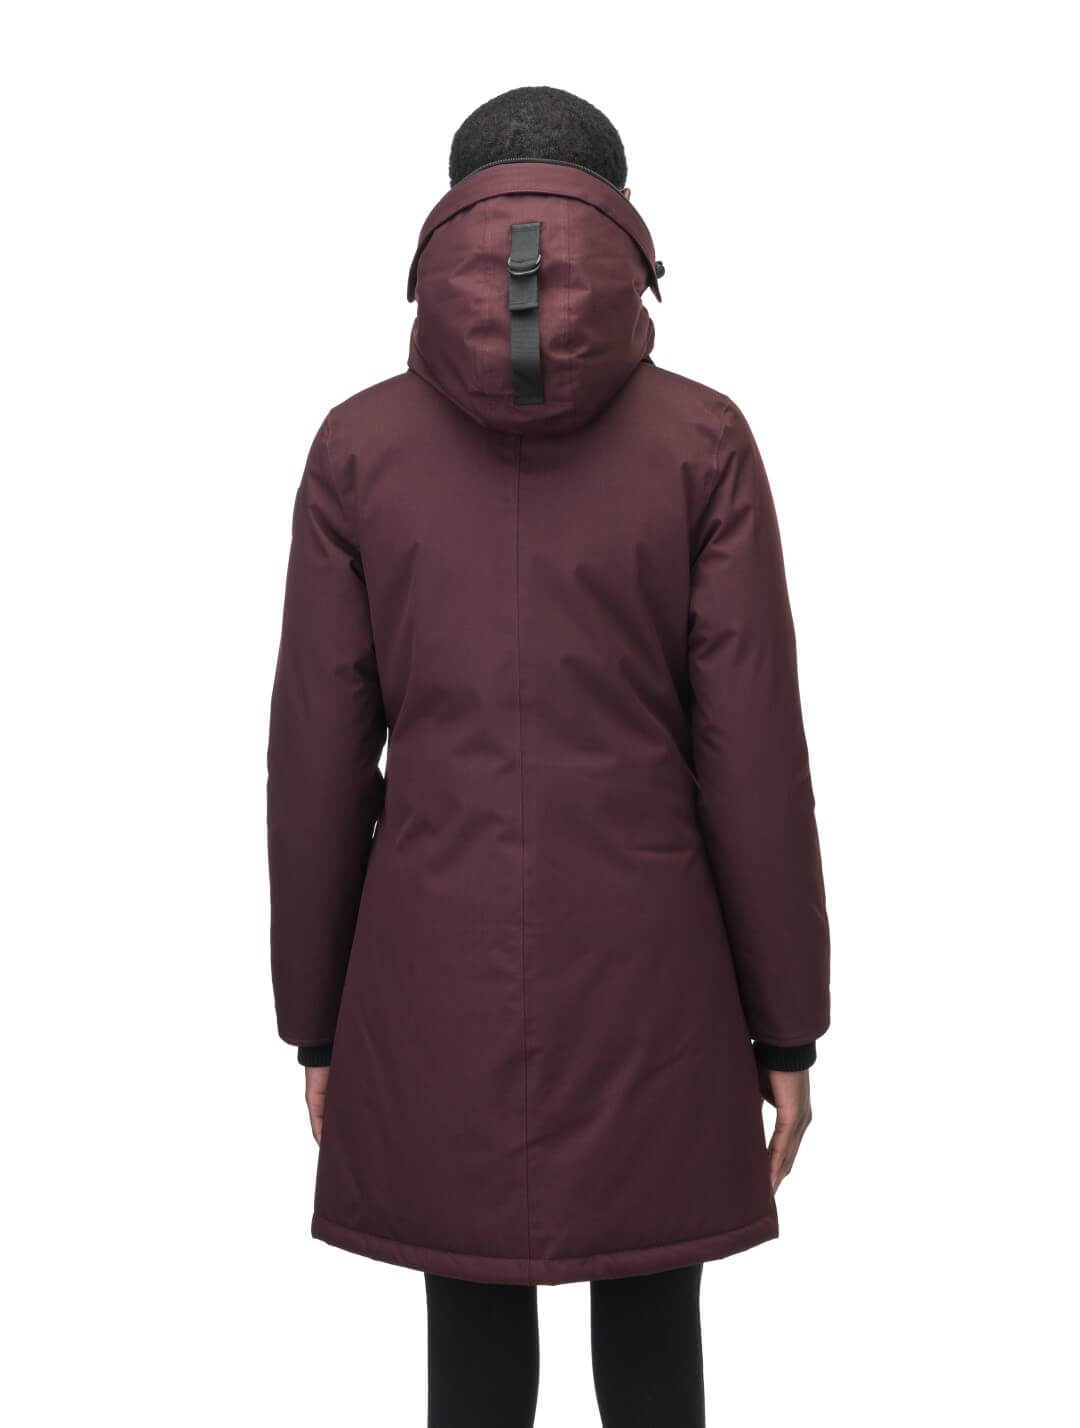 Merideth Furless Ladies Parka in thigh length, Canadian white duck down insulation, removable down-filled hood, centre-front two-way zipper with magnetic wind flap closure, four exterior pockets, and elastic ribbed cuffs, in Merlot